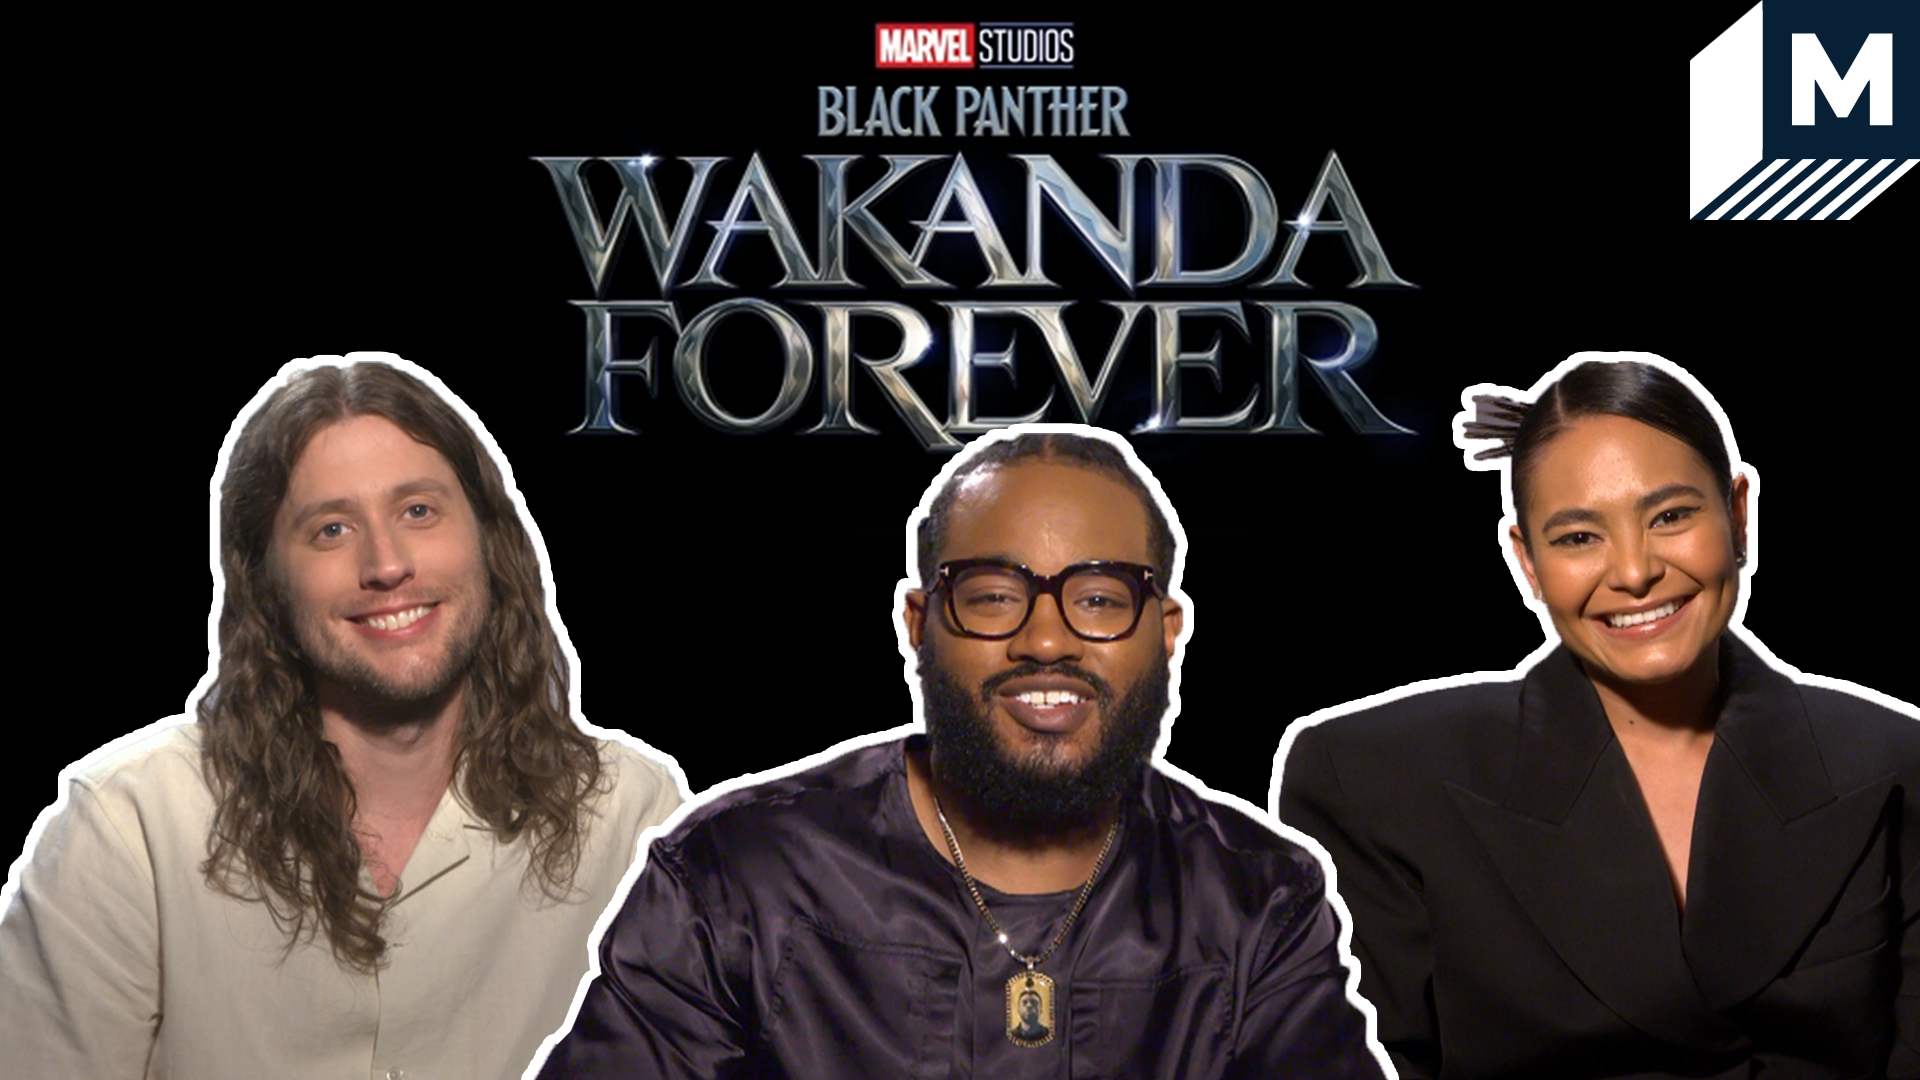 How ‘Black Panther: Wakanda Forever’ continues to bring diverse voices into the MCU